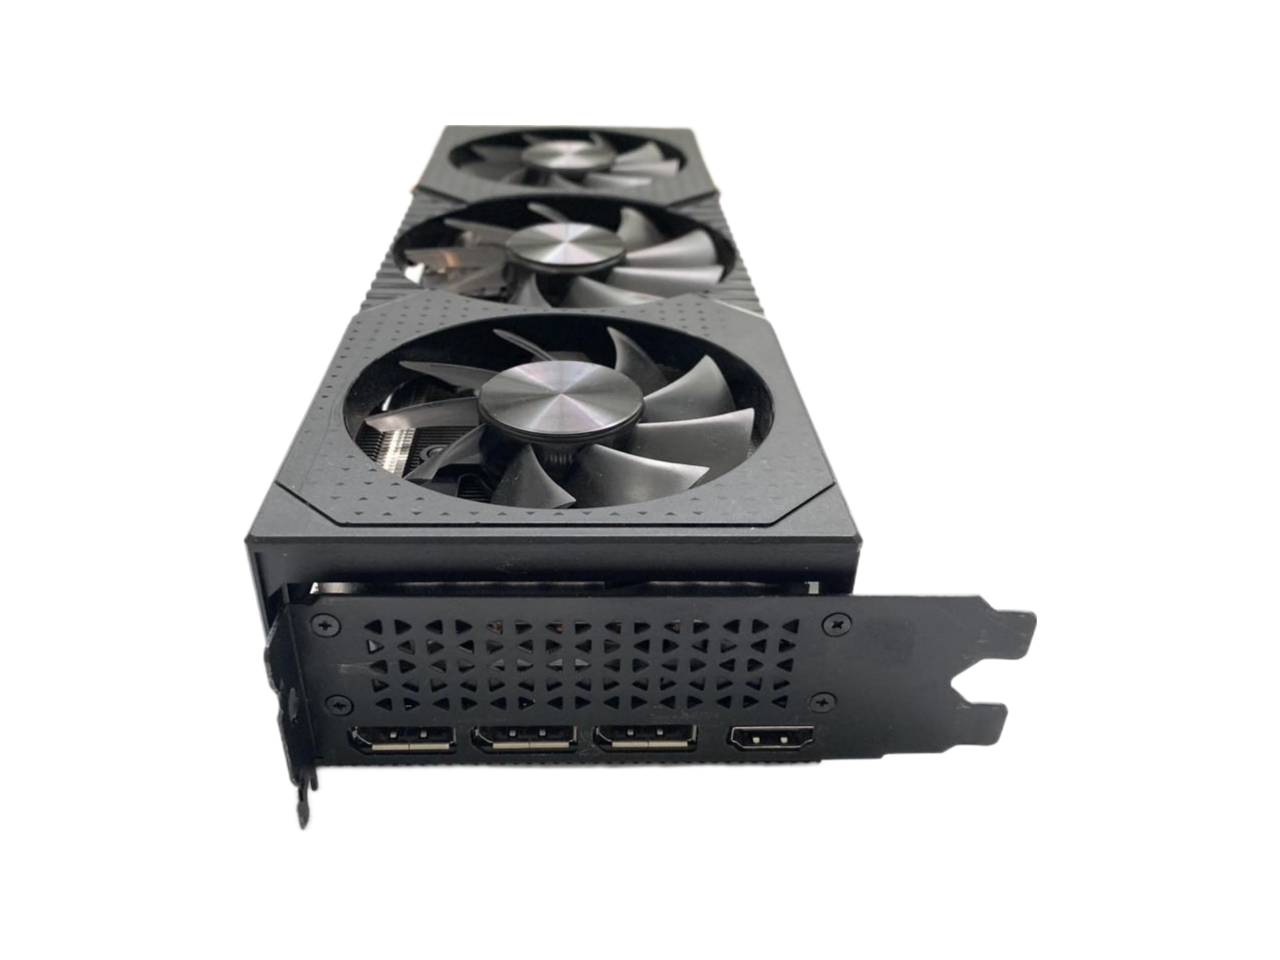 HP NVIDIA RTX 3090 FHR M24410-001 Gaming Video Graphics Card Ampere GPU 24GB GDDR6X Non-LHR Full Hash Rate